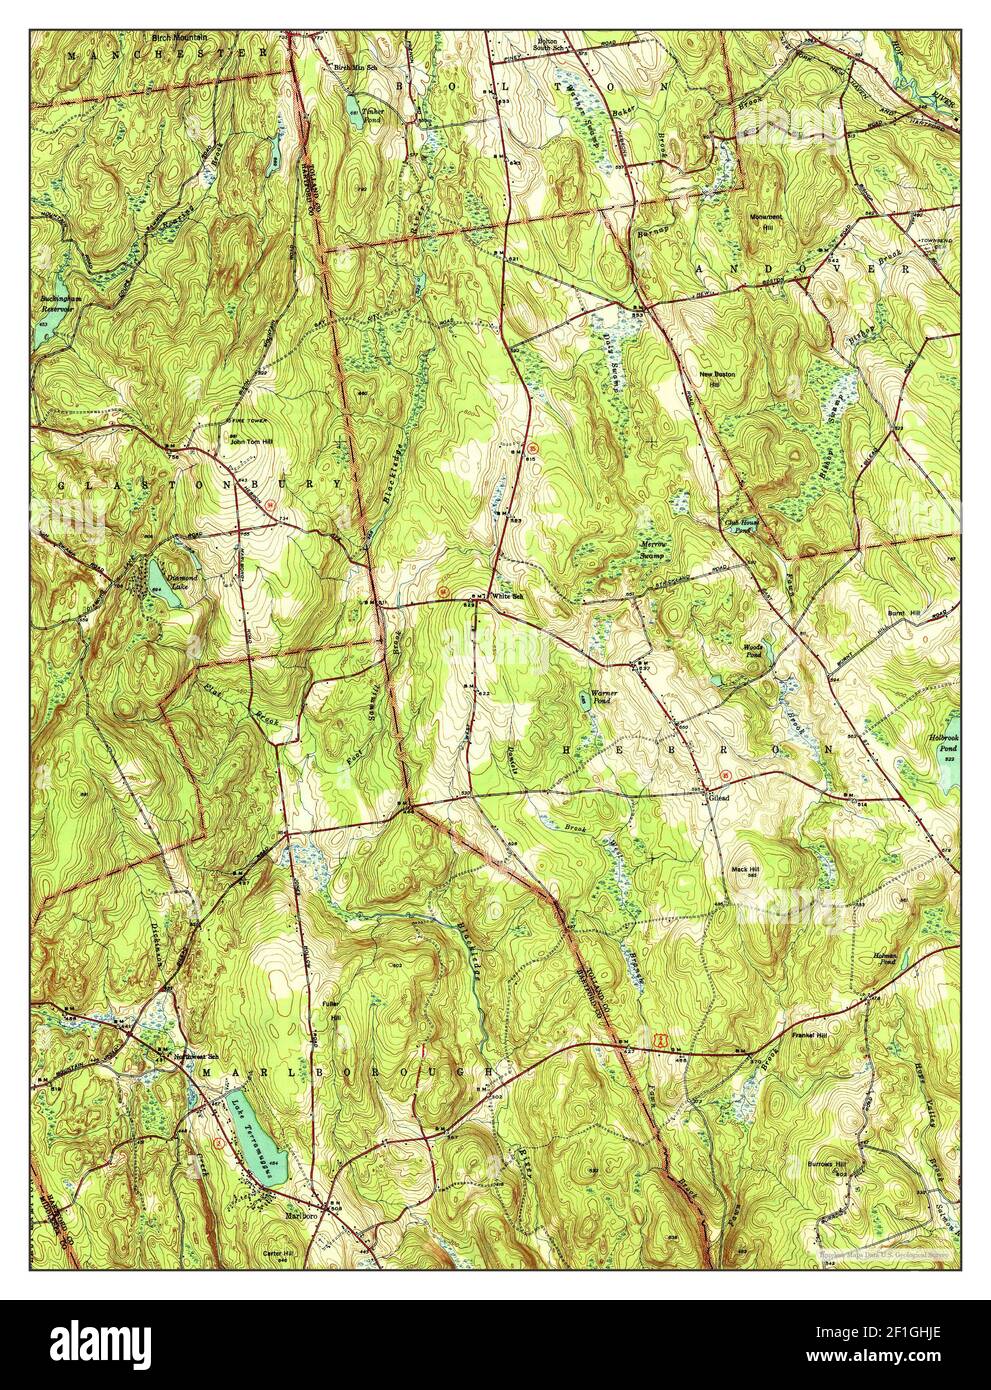 Marlboro, Connecticut, map 1944, 1:31680, United States of America by Timeless Maps, data U.S. Geological Survey Stock Photo